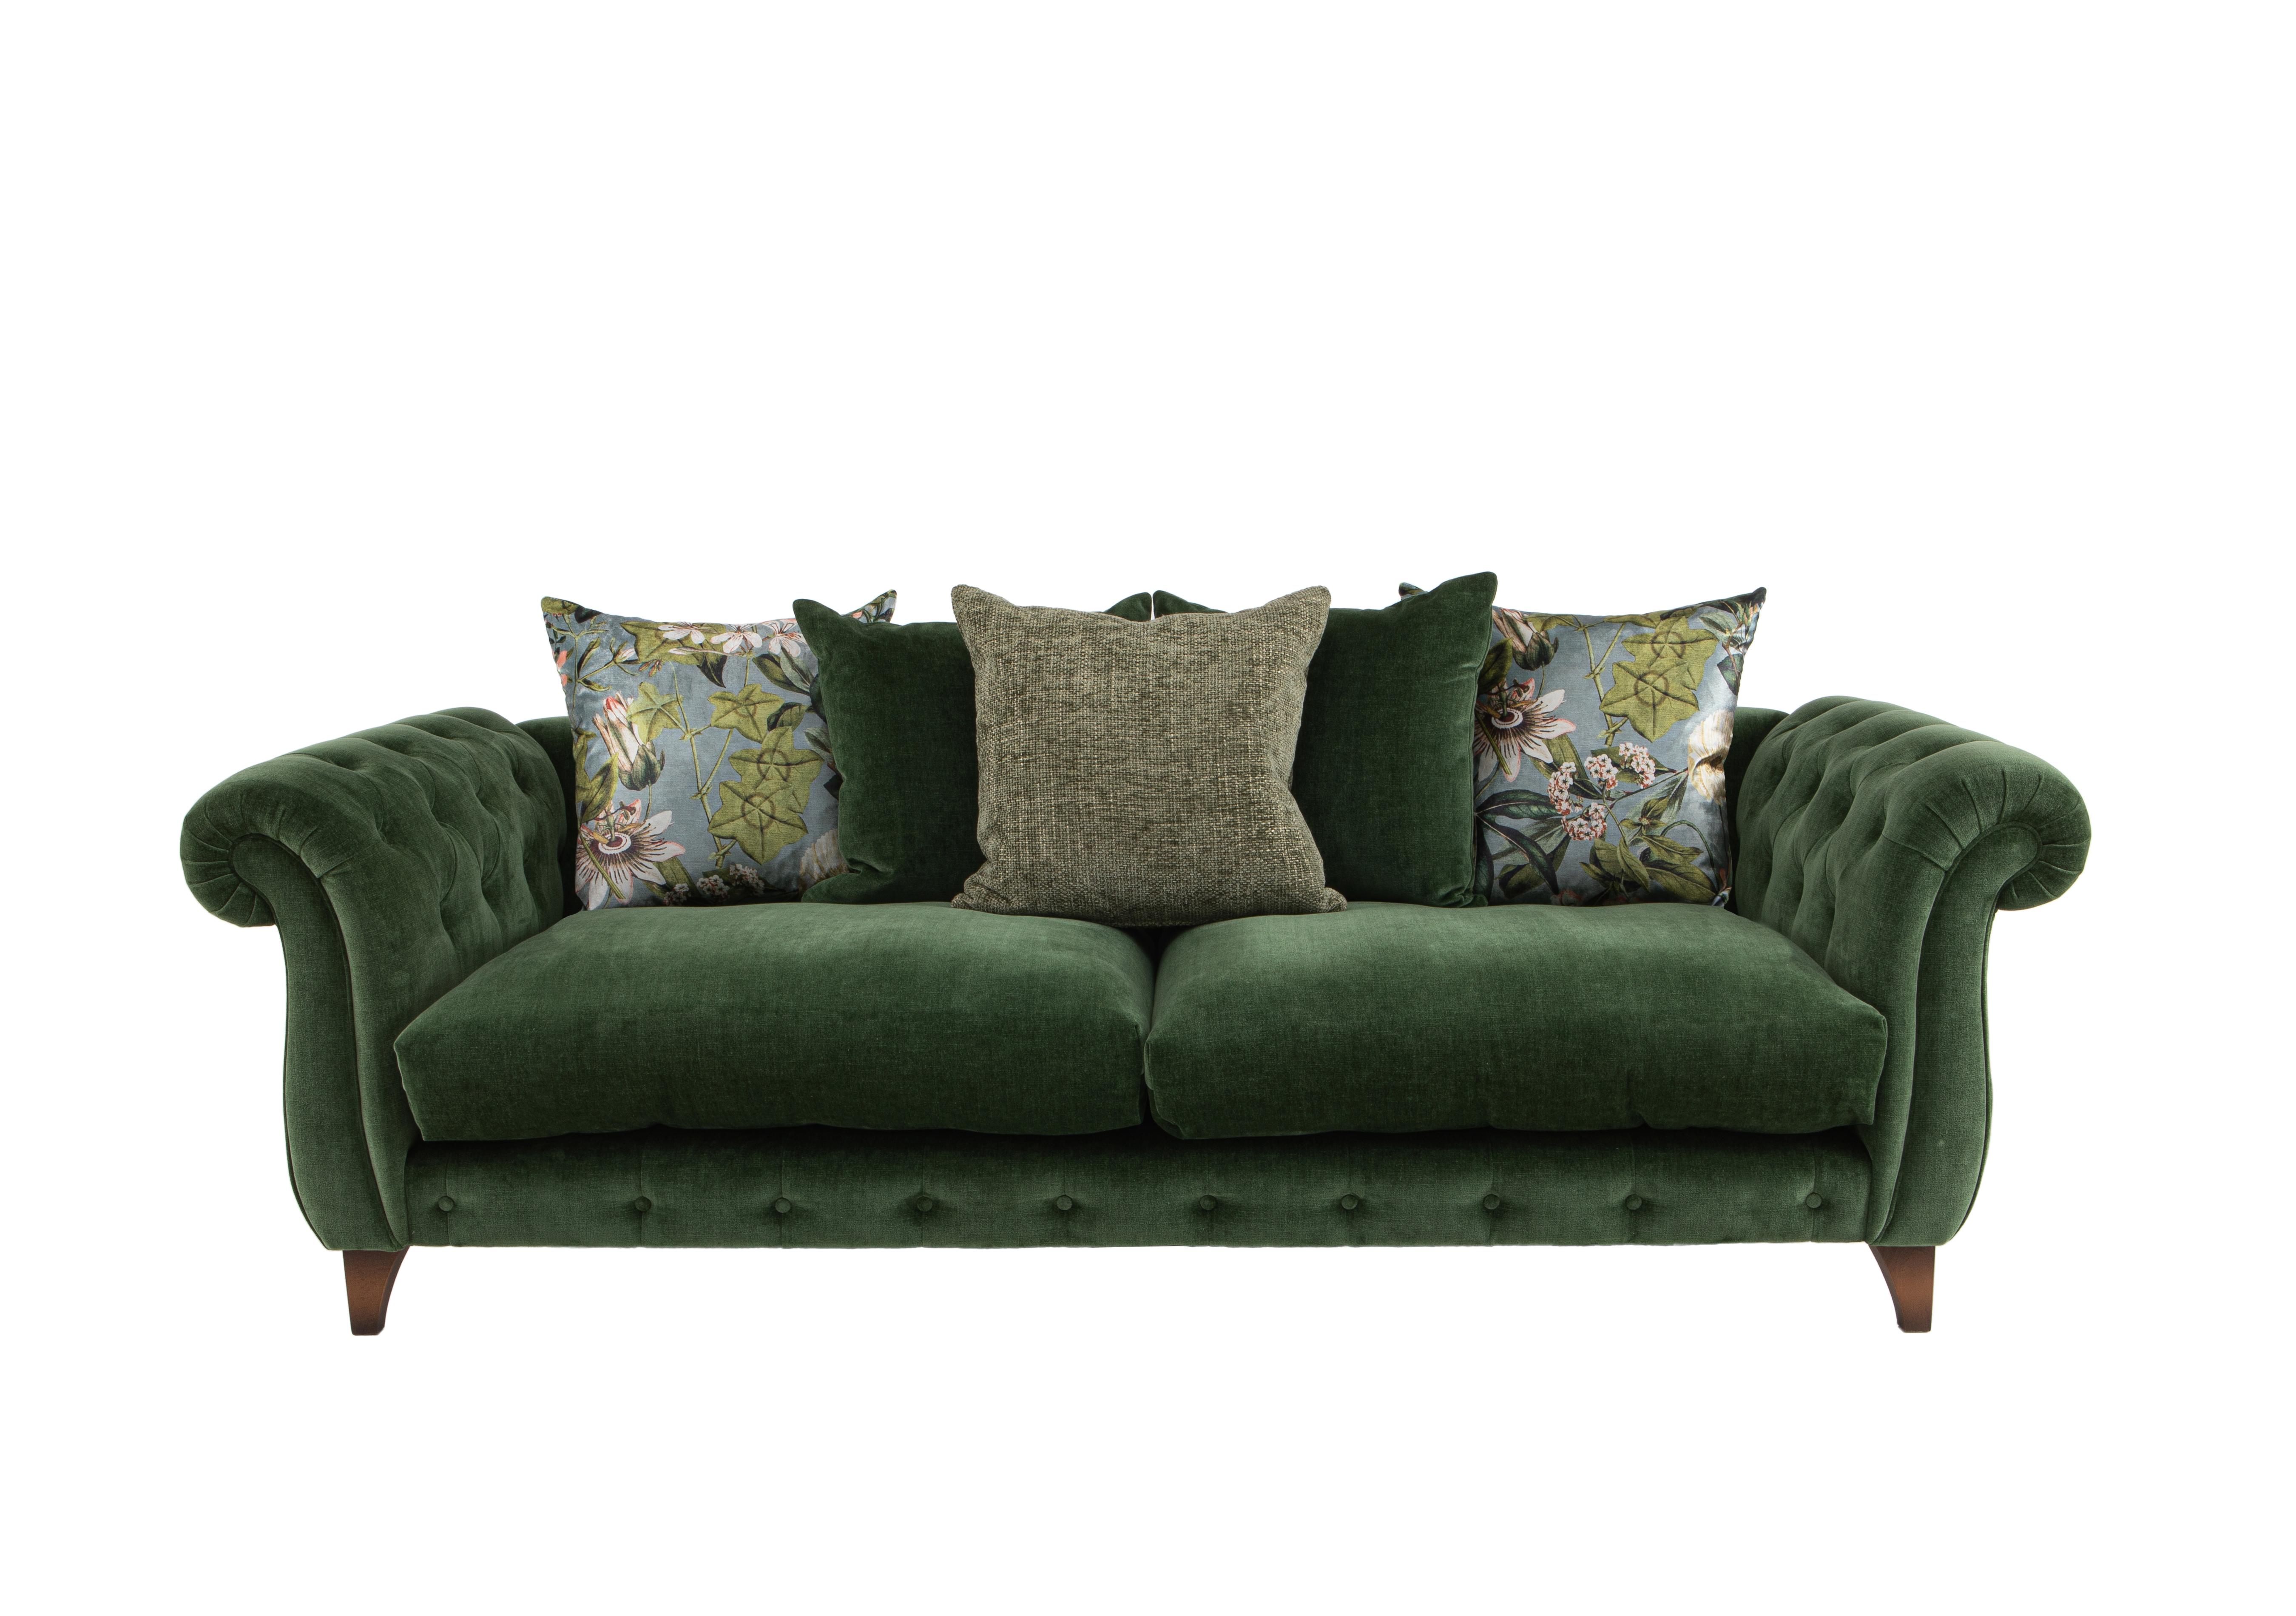 Boutique Palace Fabric 3 Seater Scatter Back Sofa in Oasis Parrot on Furniture Village